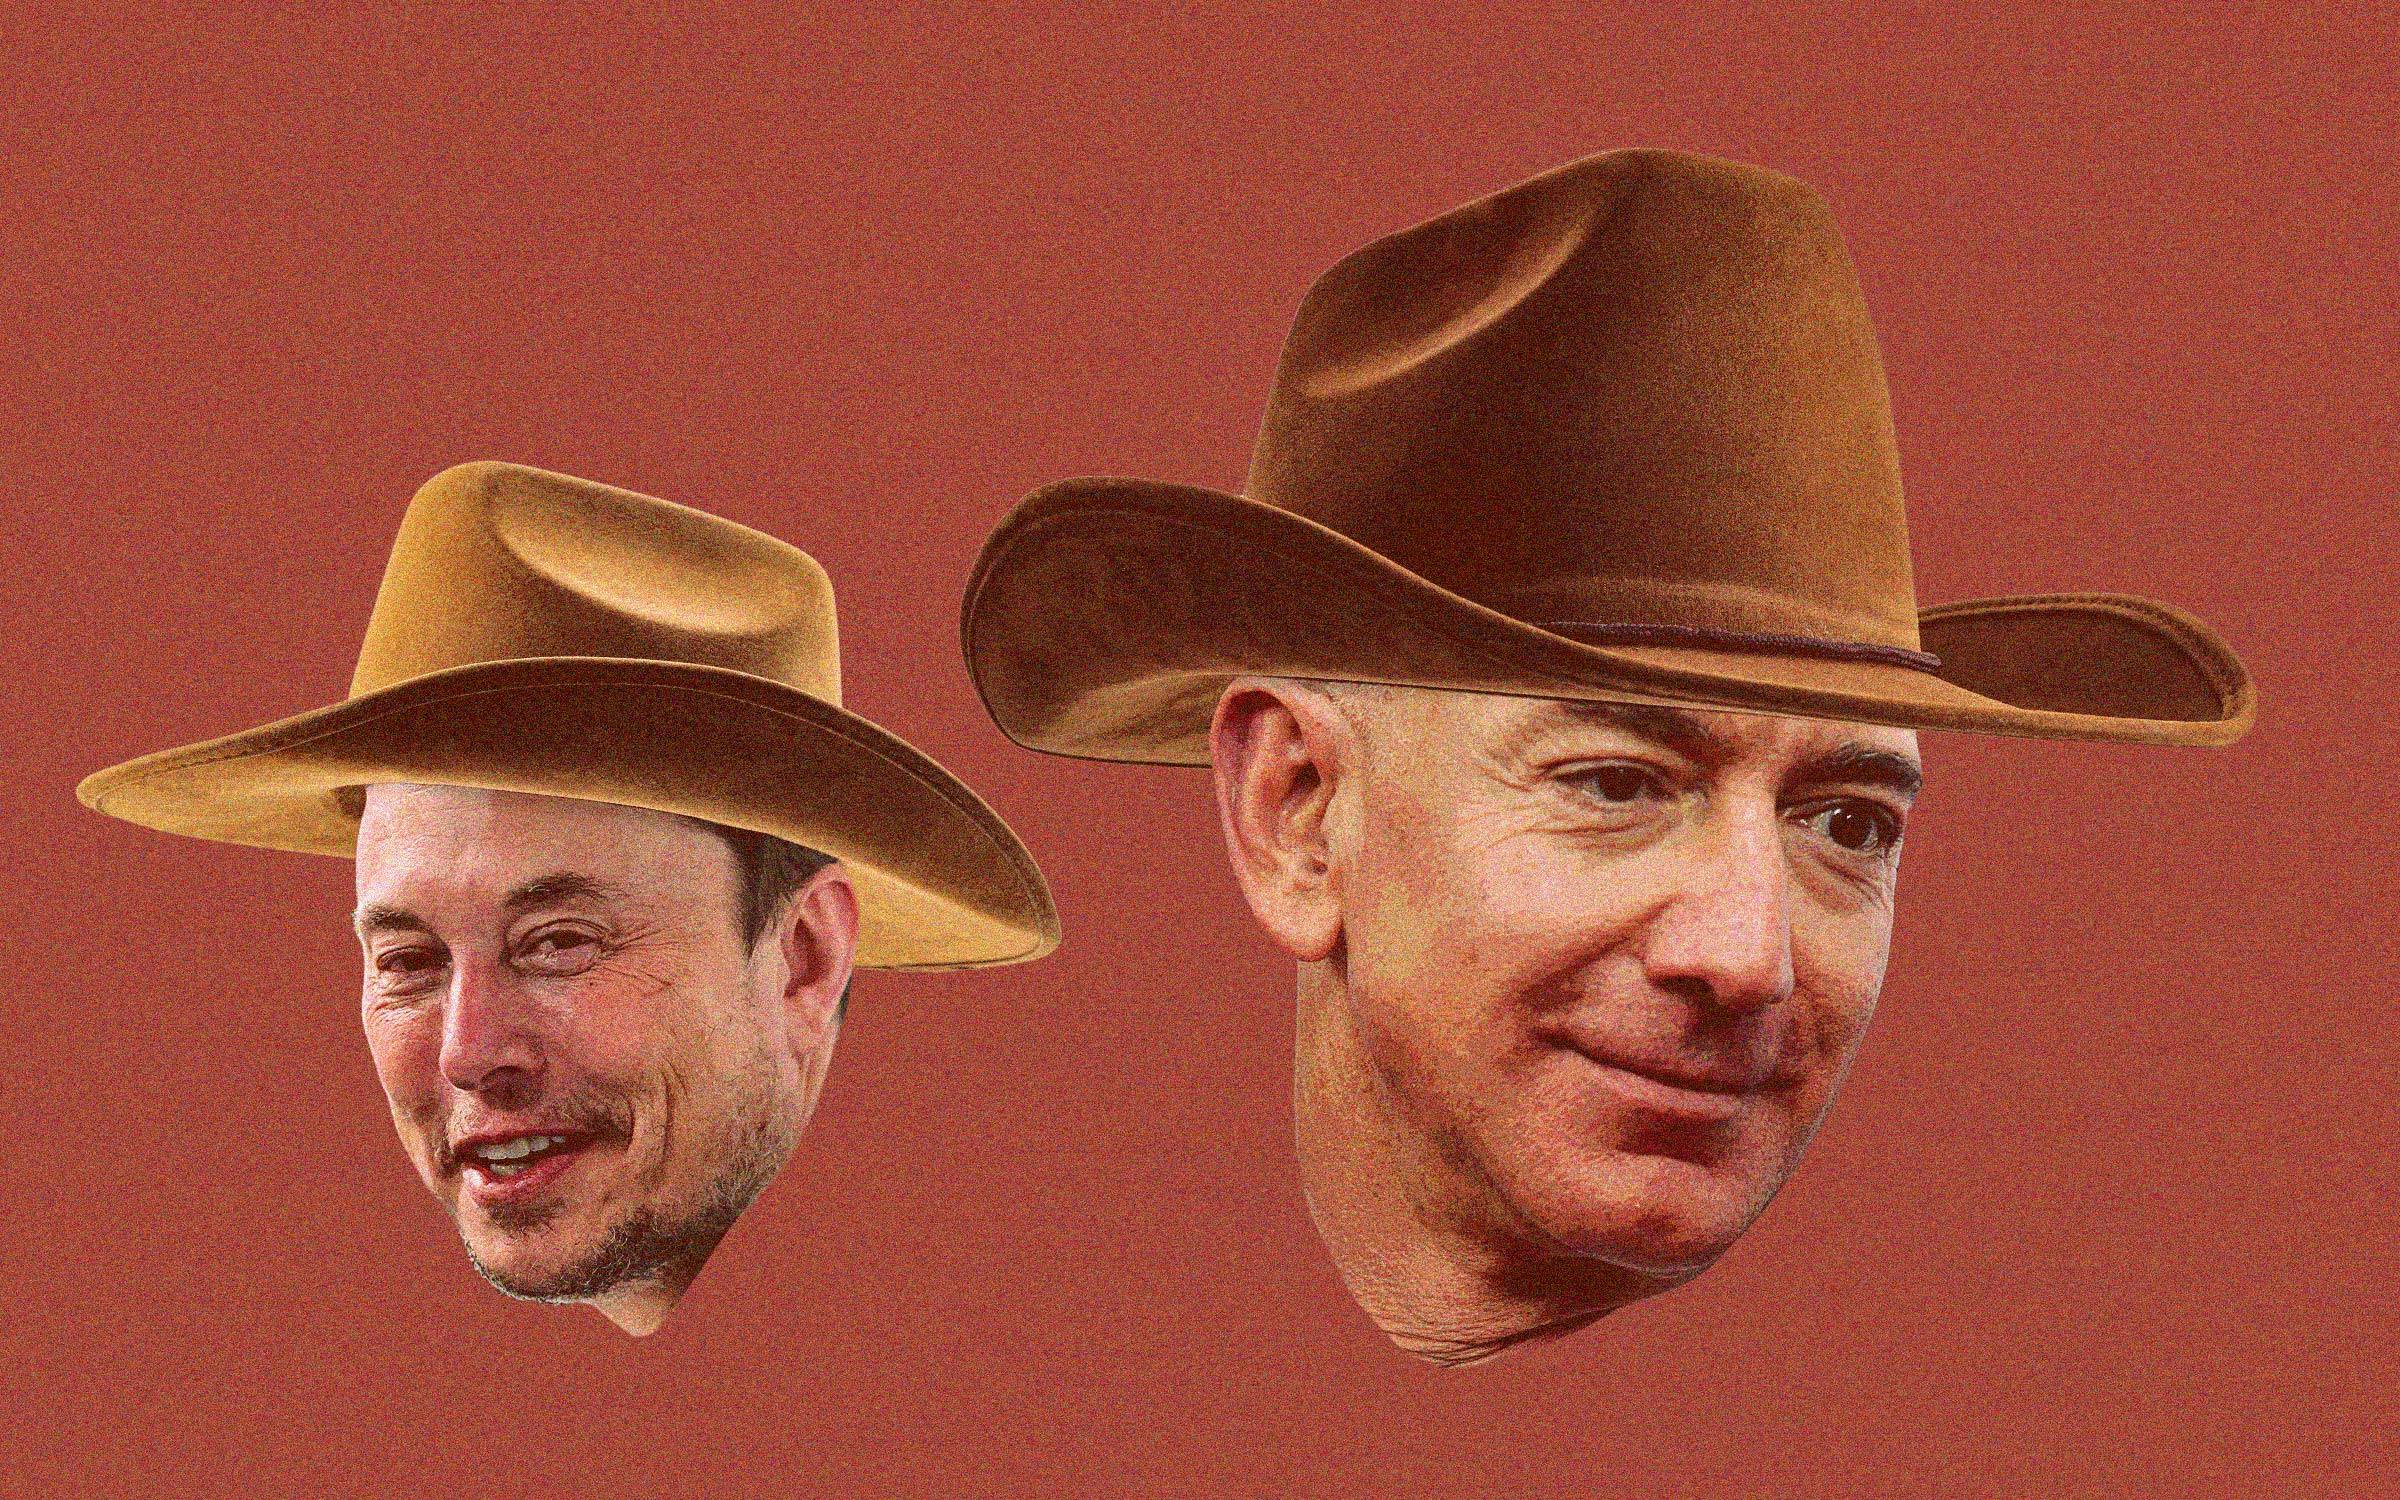 https://img.texasmonthly.com/2023/11/rich-guy-cowboy.jpg?auto=compress&crop=faces&fit=fit&fm=pjpg&ixlib=php-3.3.1&q=45